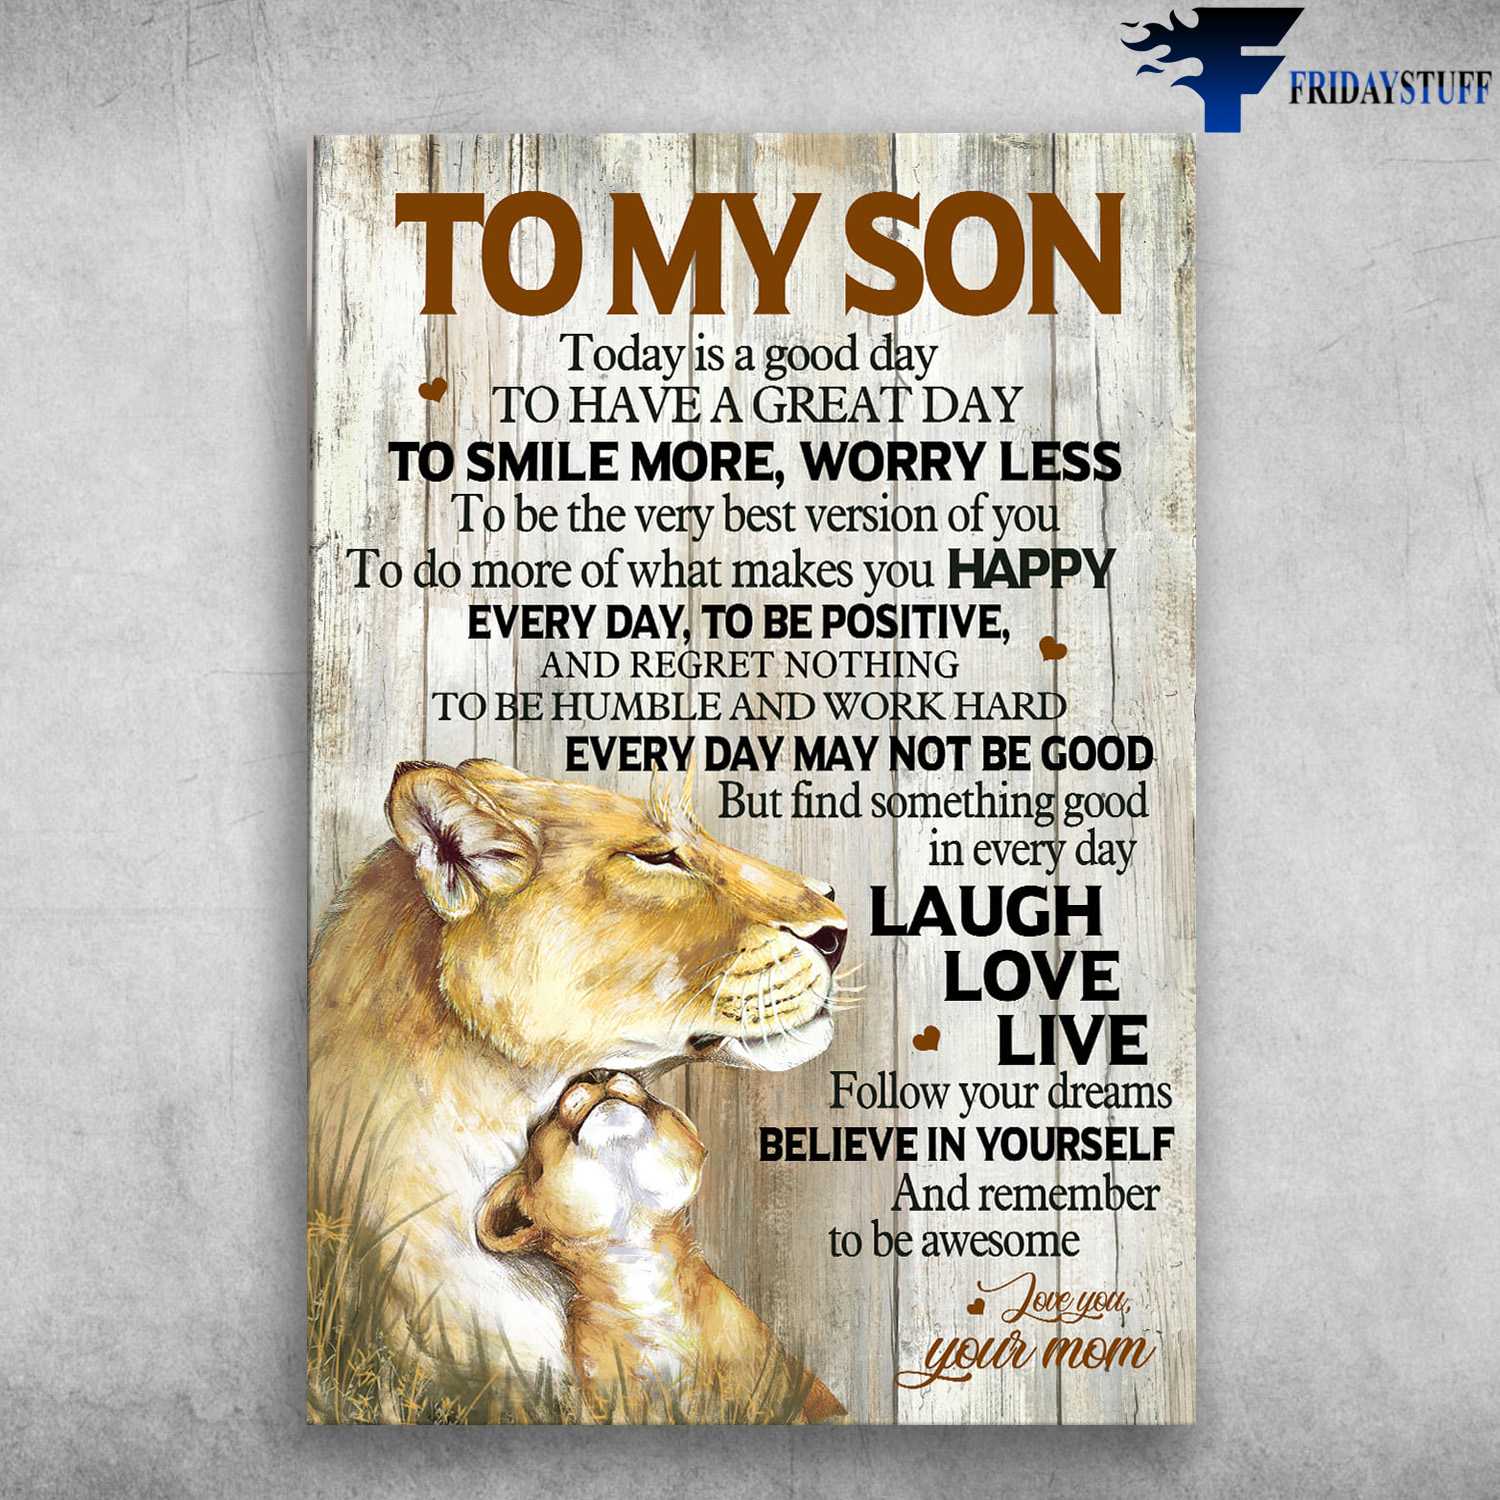 Mom And Son Lion - To My Son, Today Is A Good Day, To Have A Great Day, To Smile More, Worry Less, To Be The Very Best Version Of You, Laugh Love Live, Love You, Your Mom